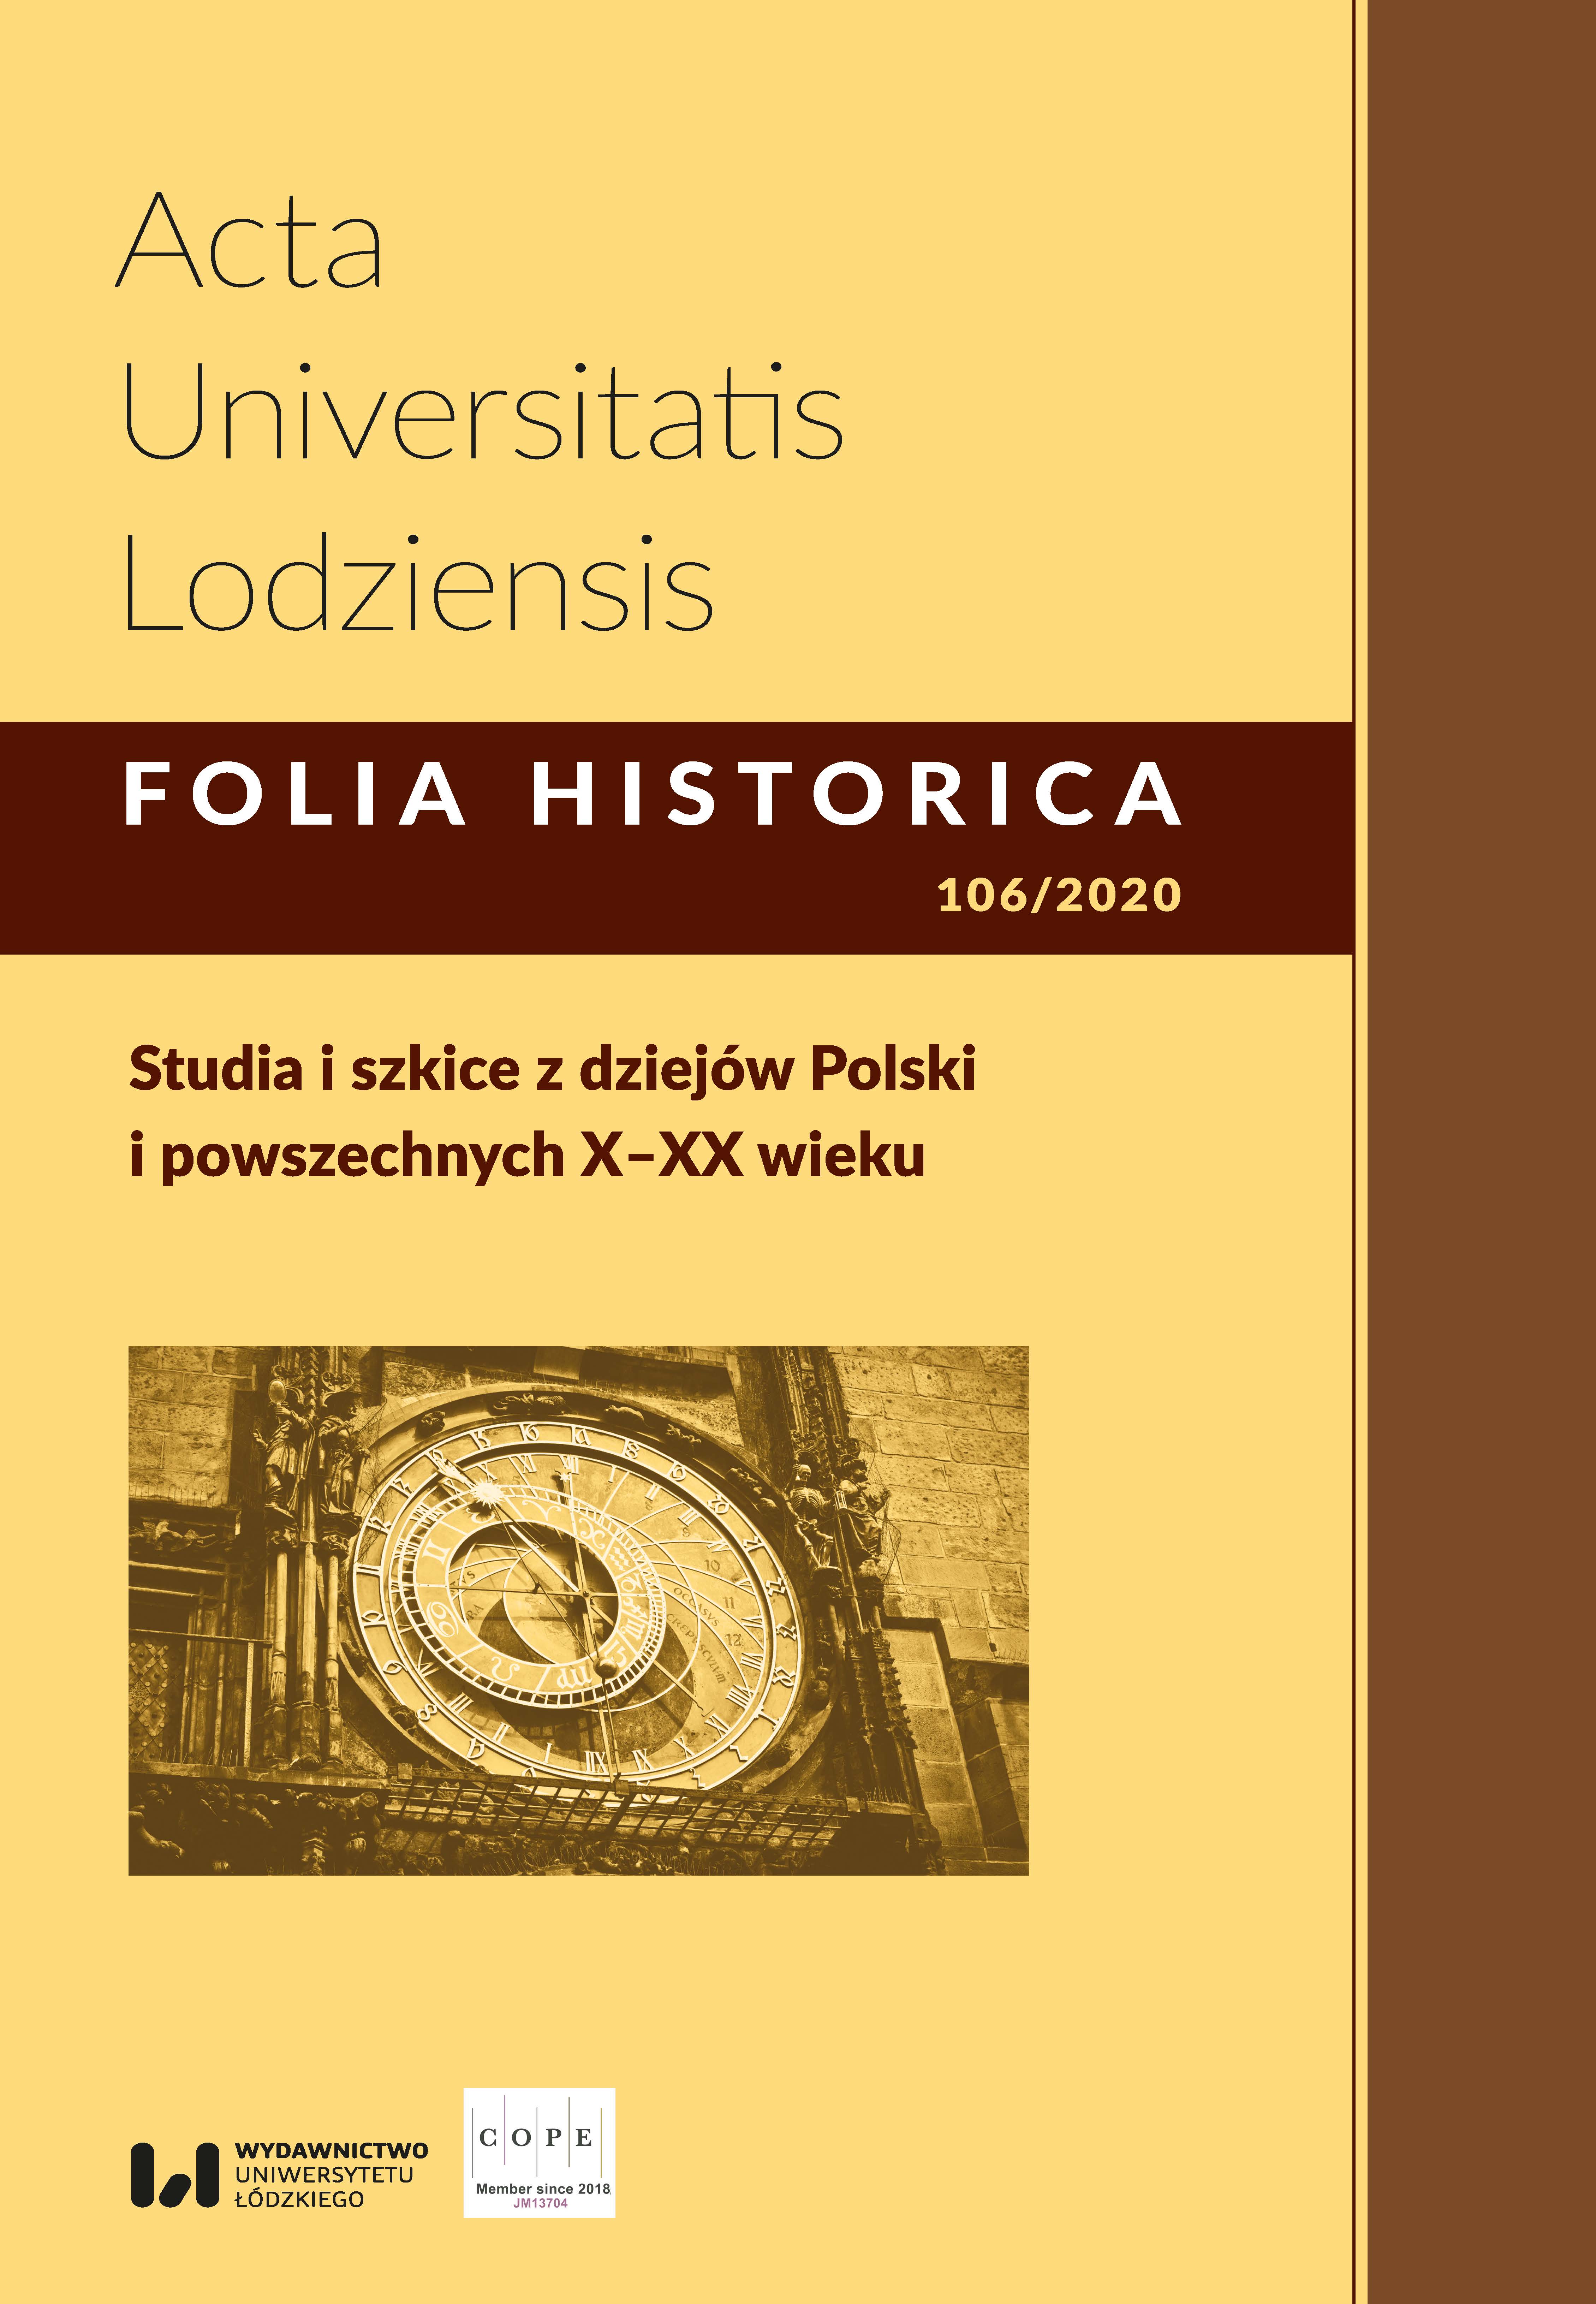 History and spatial development of Jewish settlement (17th–19th century) in Piotrków Trybunalski based on selected source materials Cover Image